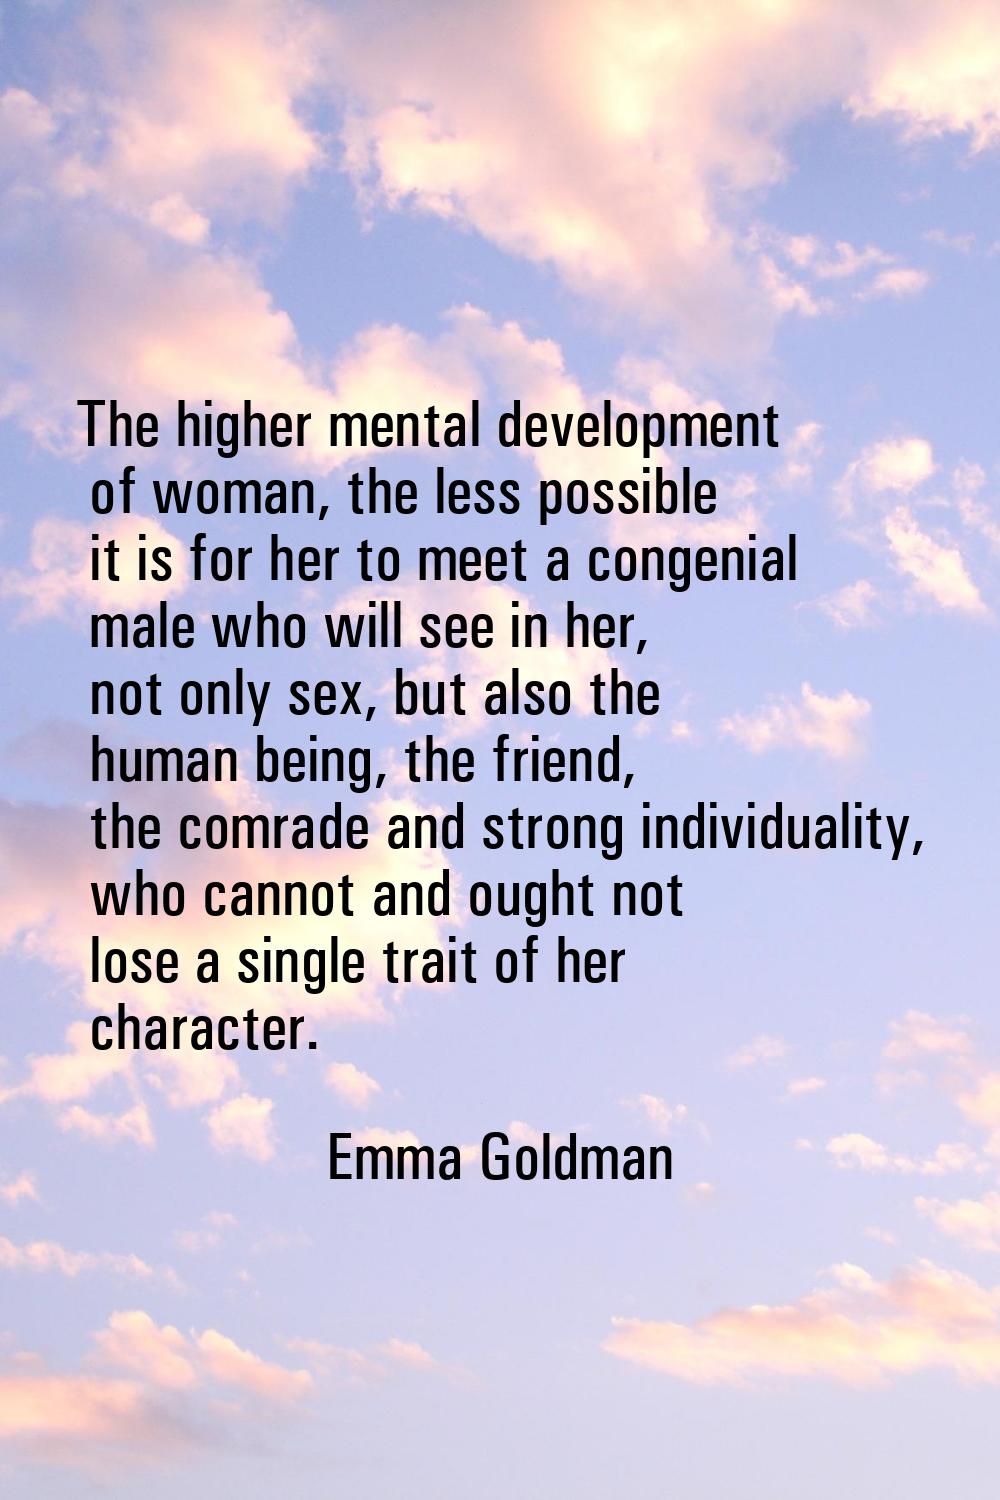 The higher mental development of woman, the less possible it is for her to meet a congenial male wh